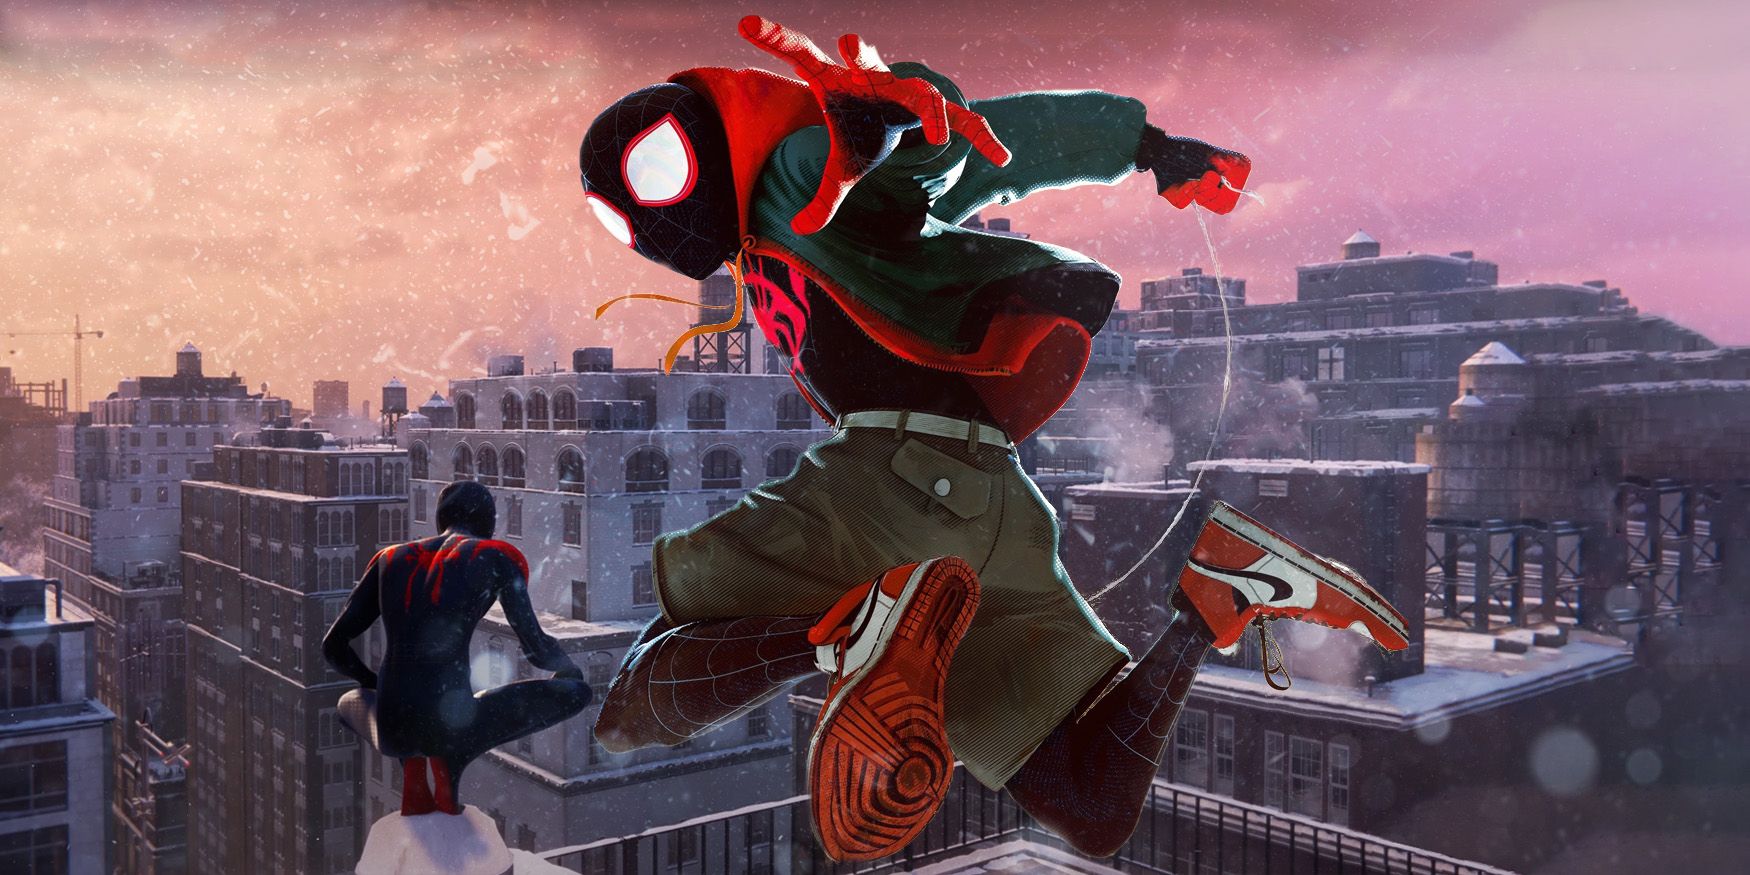 Insomniac's Miles Morales looks out over a snow-covered Manhattan, as Into The Spider-Verse's Miles Morales does a dynamic leaping pose in the middle of the screen